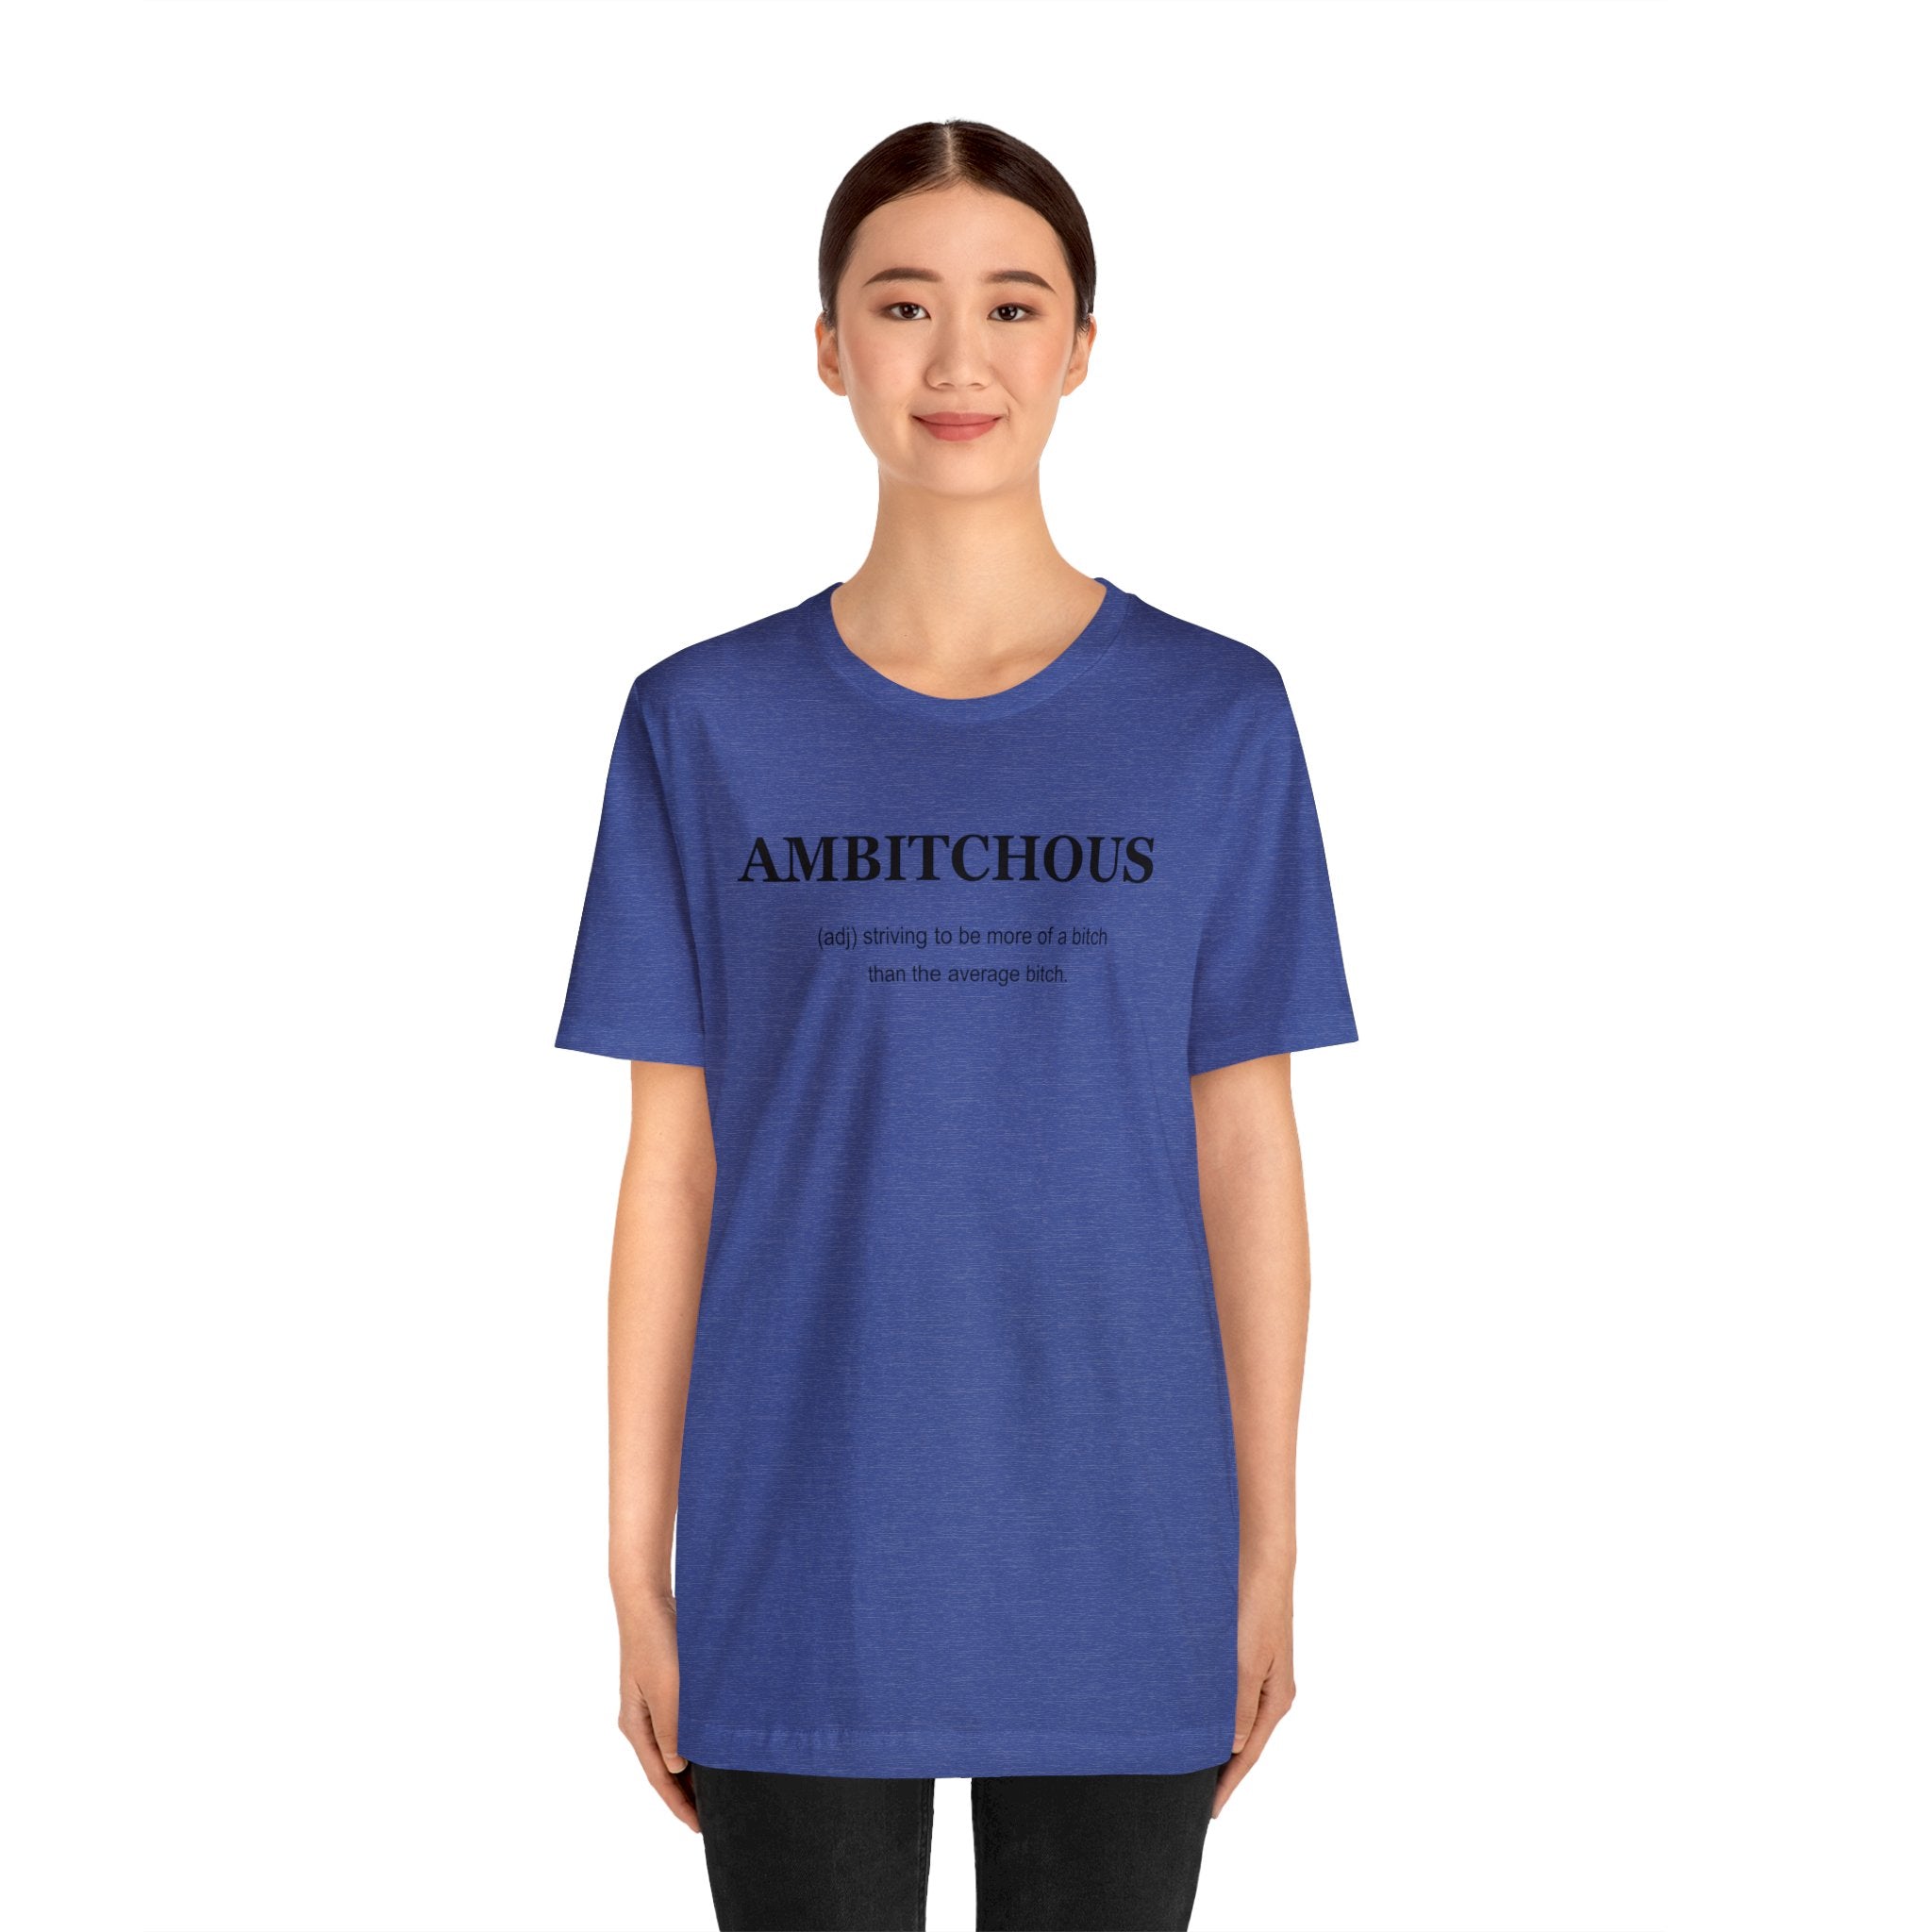 An Ambitchious woman in a blue T-shirt.